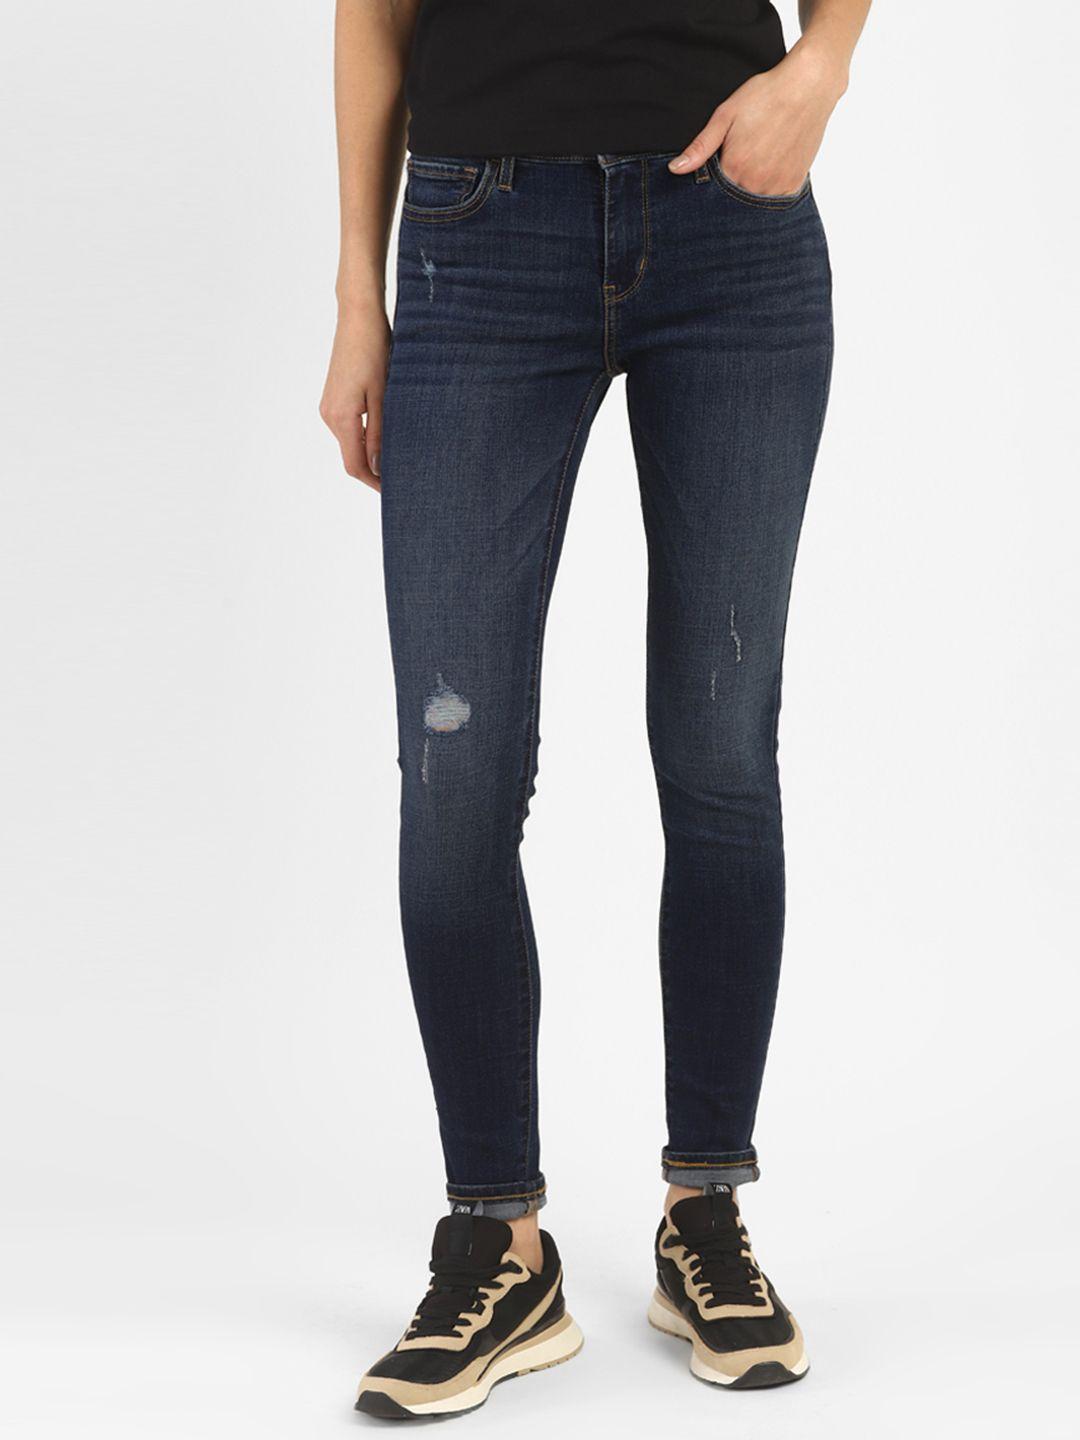 levis-women-navy-blue-710-super-skinny-fit-low-distress-light-fade-stretchable-sustainable-jeans